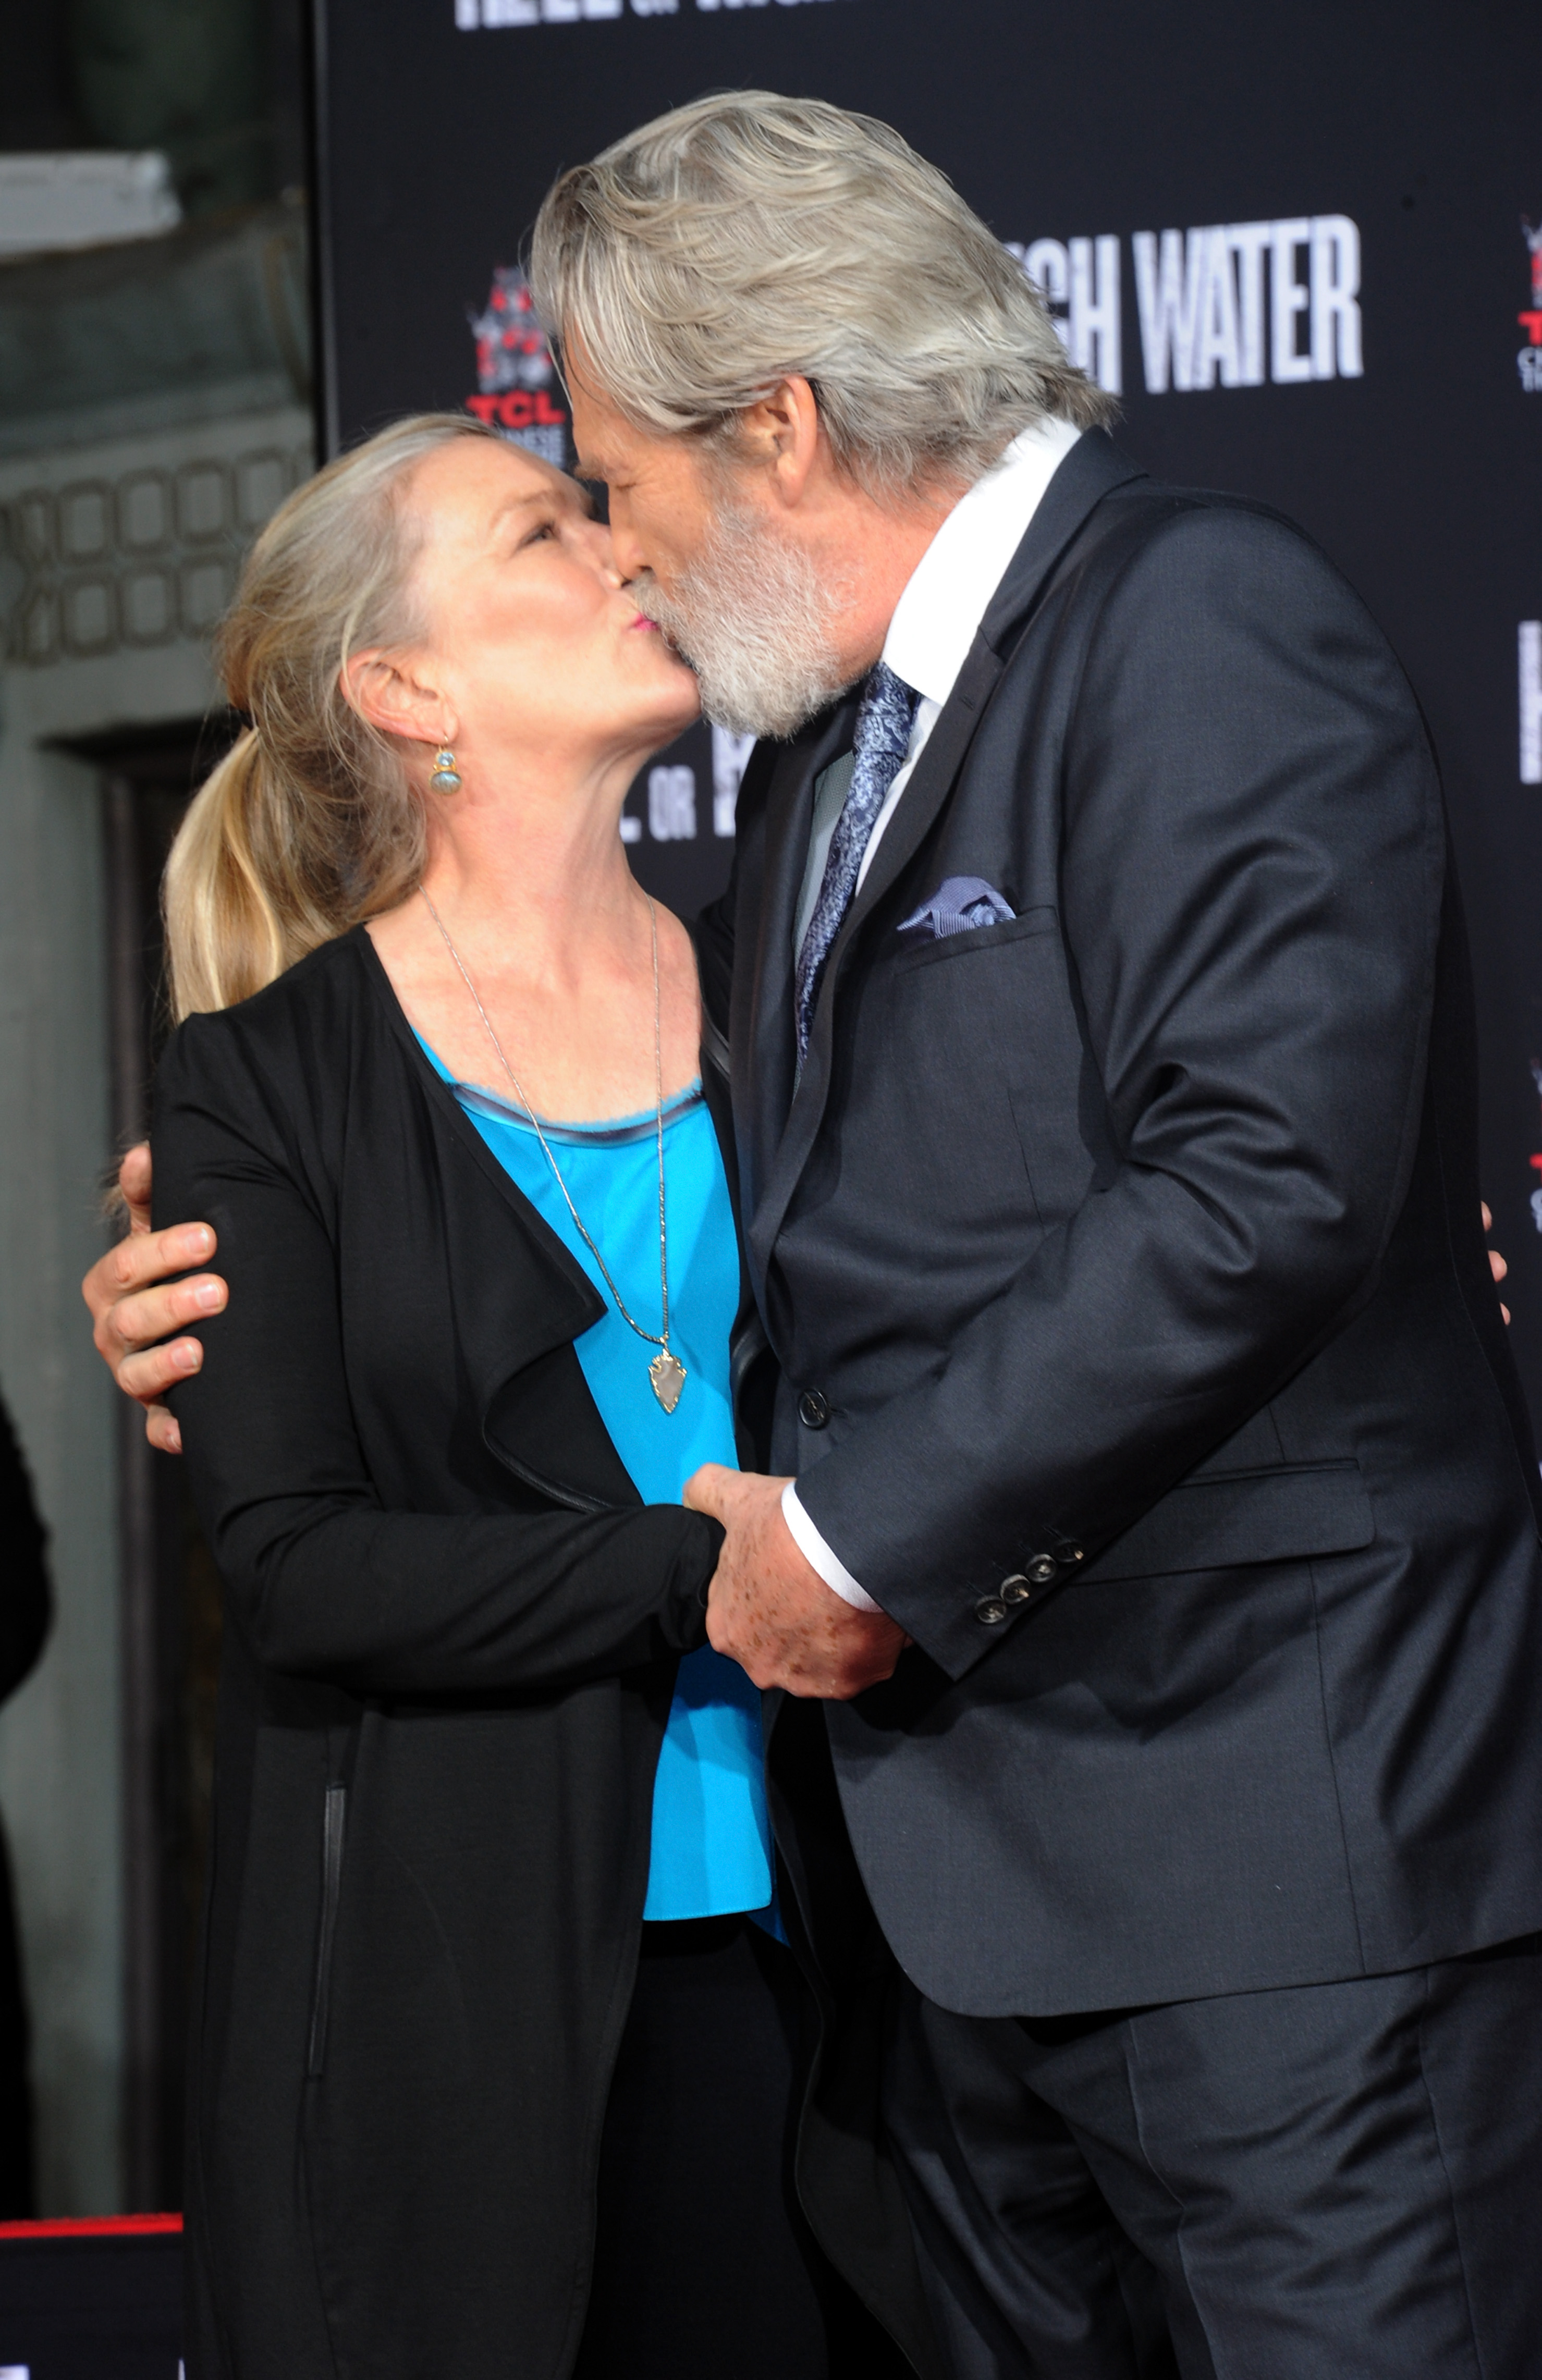 Susan and Jeff Bridges at his Hand And Footprint Ceremony in Hollywood, California, on January 6, 2017. | Source: Getty Images